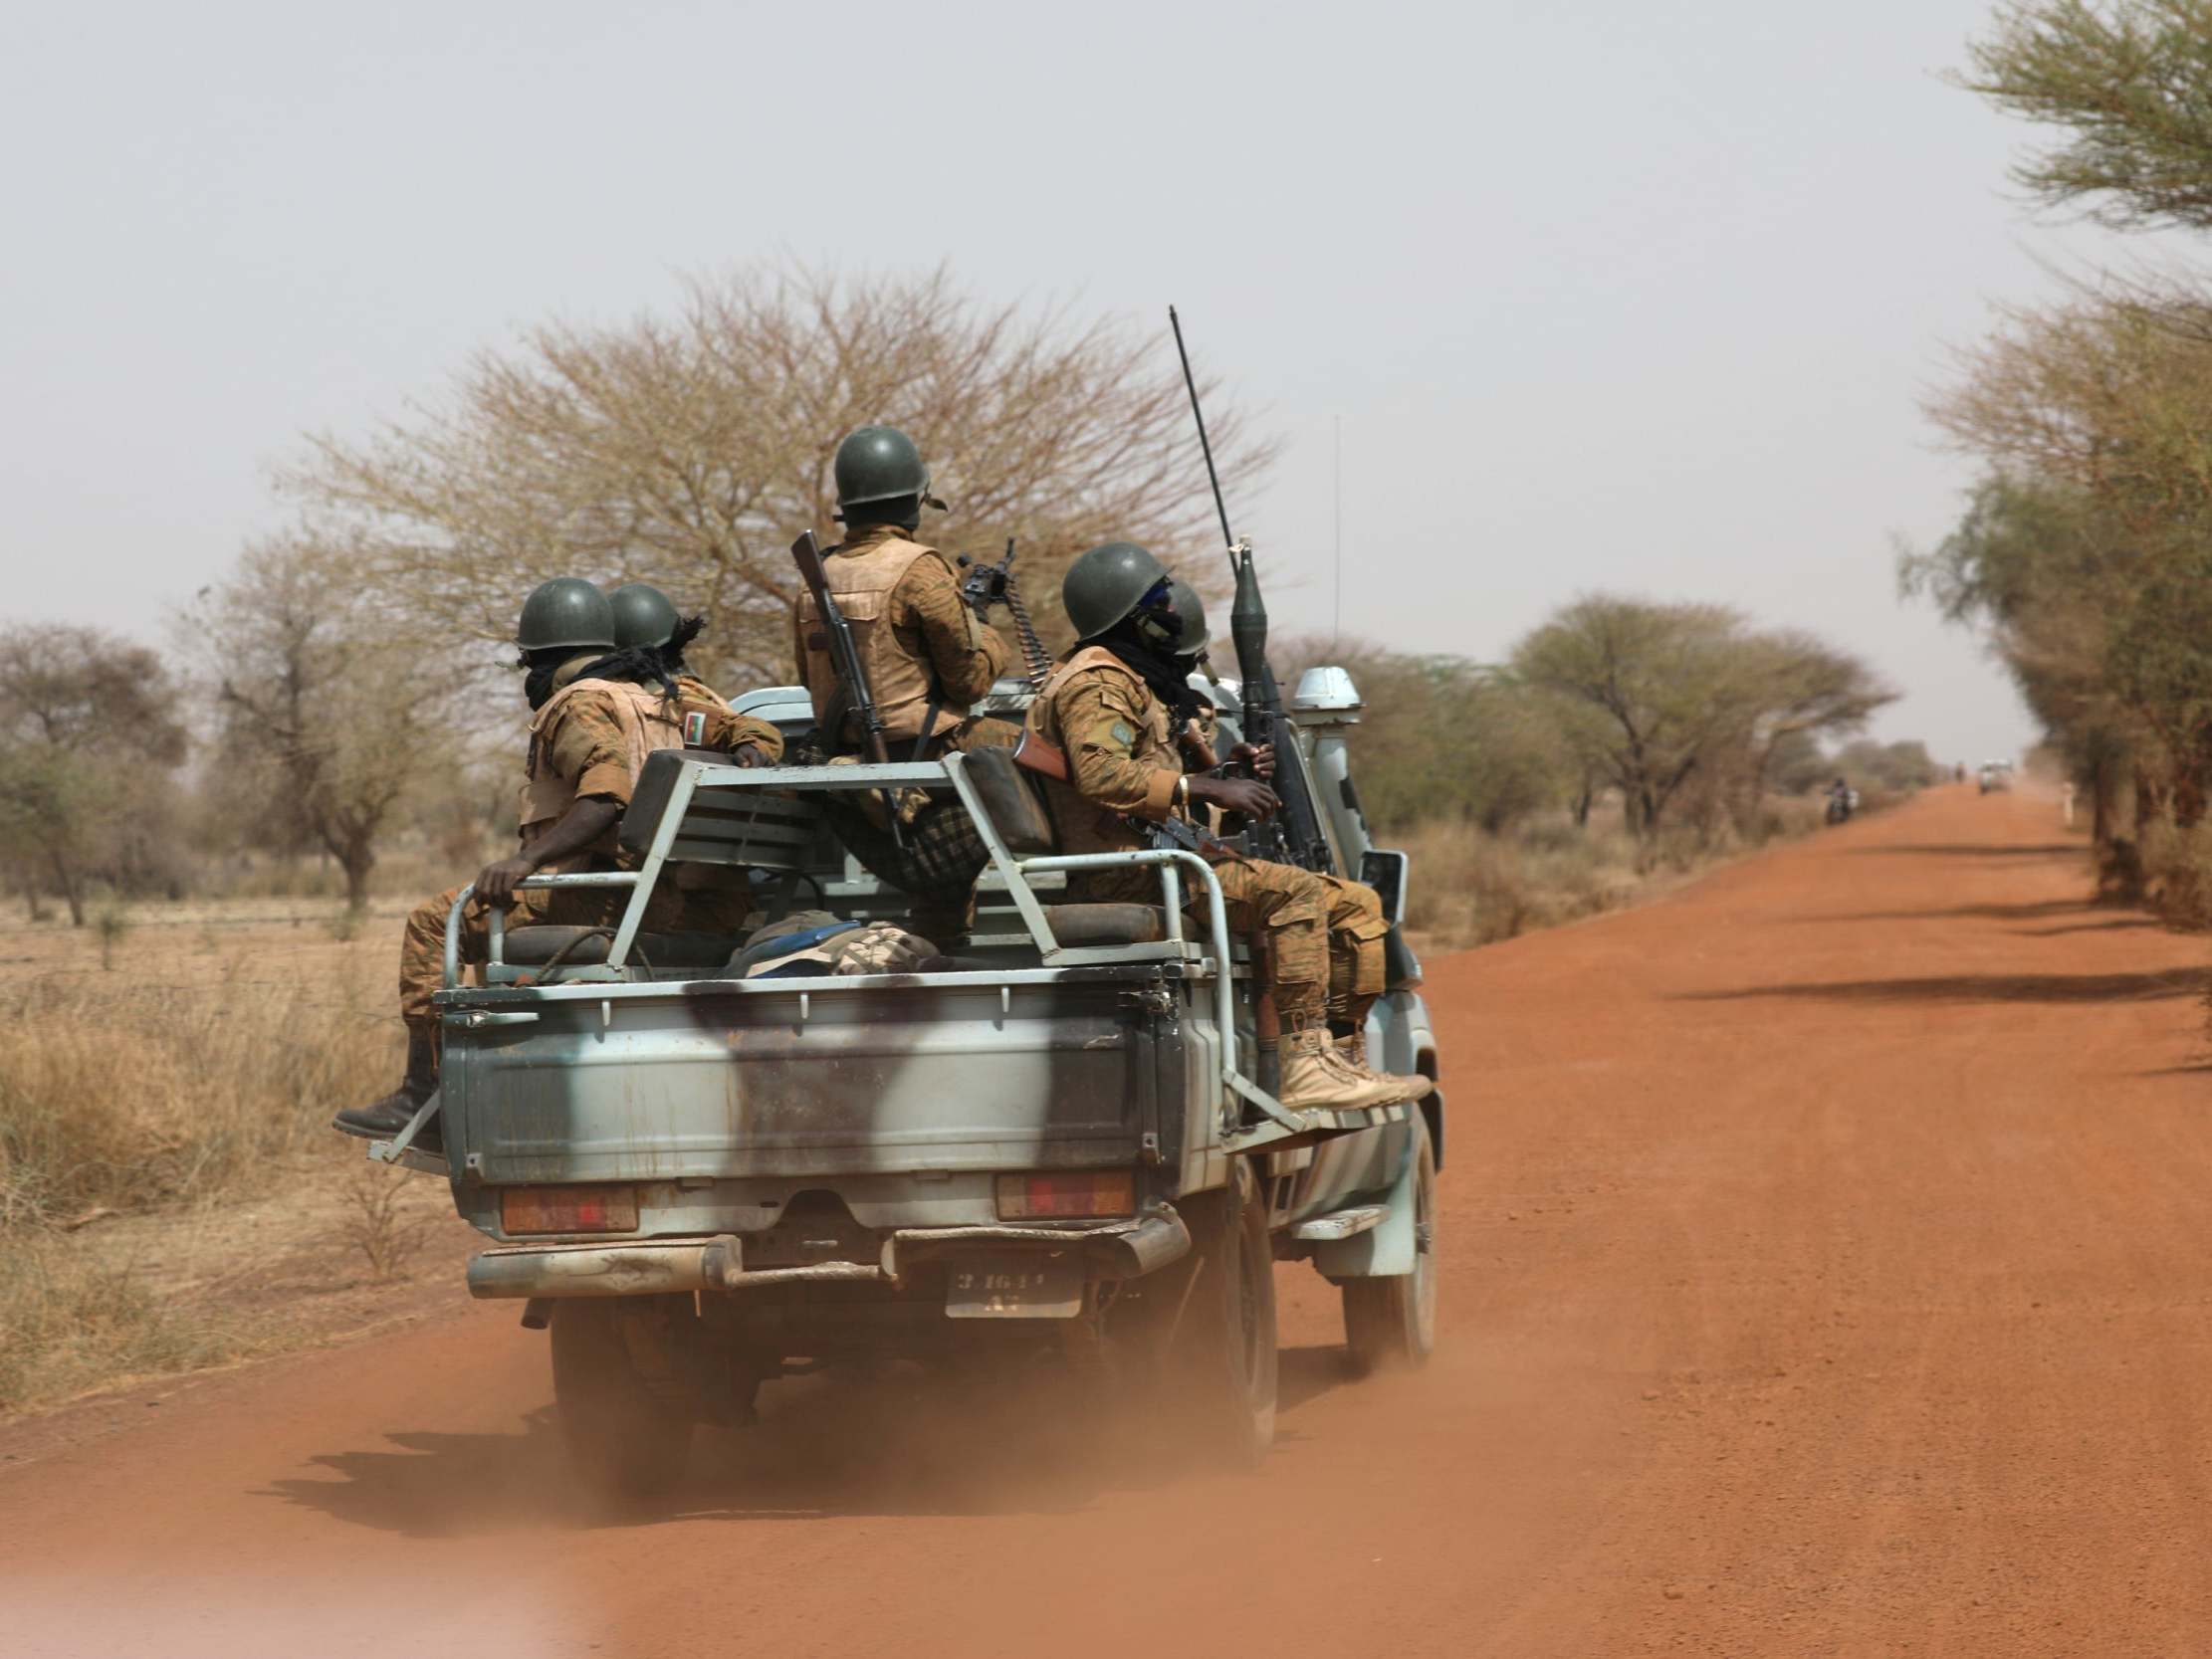 Islamist insurgency has led to turmoil in West African country